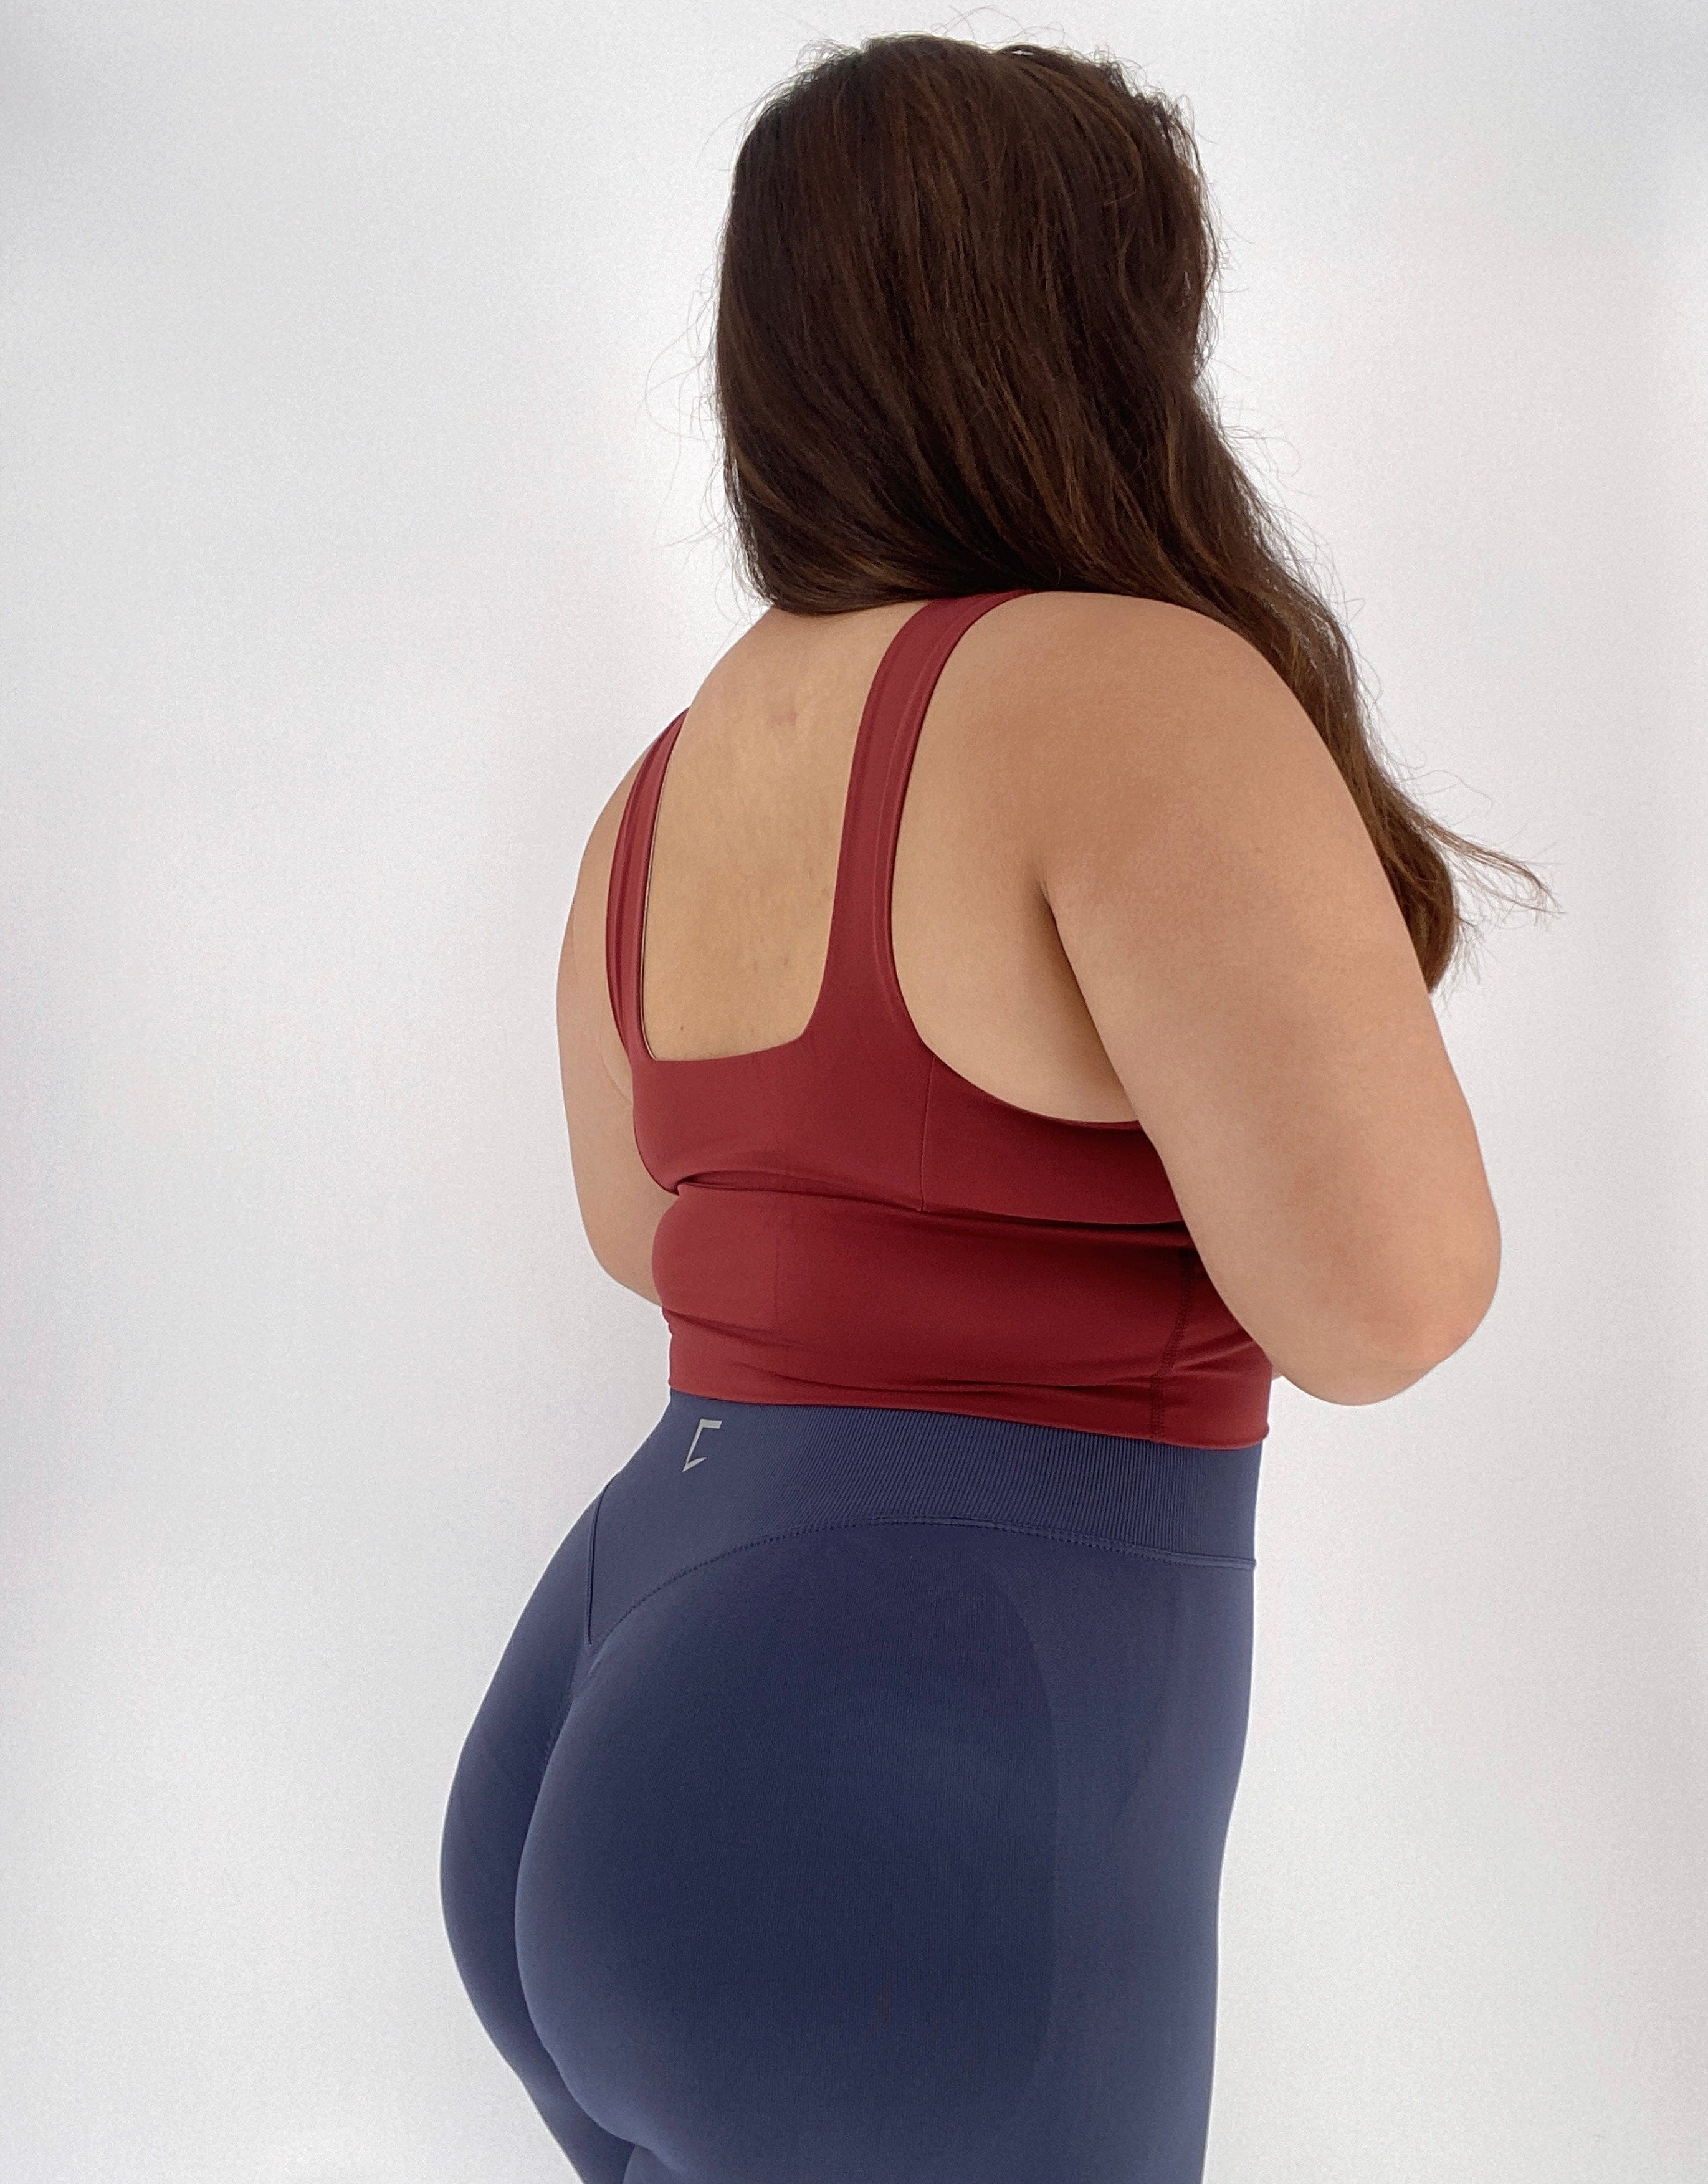 Embrace butt scrunch seamless leggings V1 (22 inch inseam)-(cutting more compressive and smaller) so size up